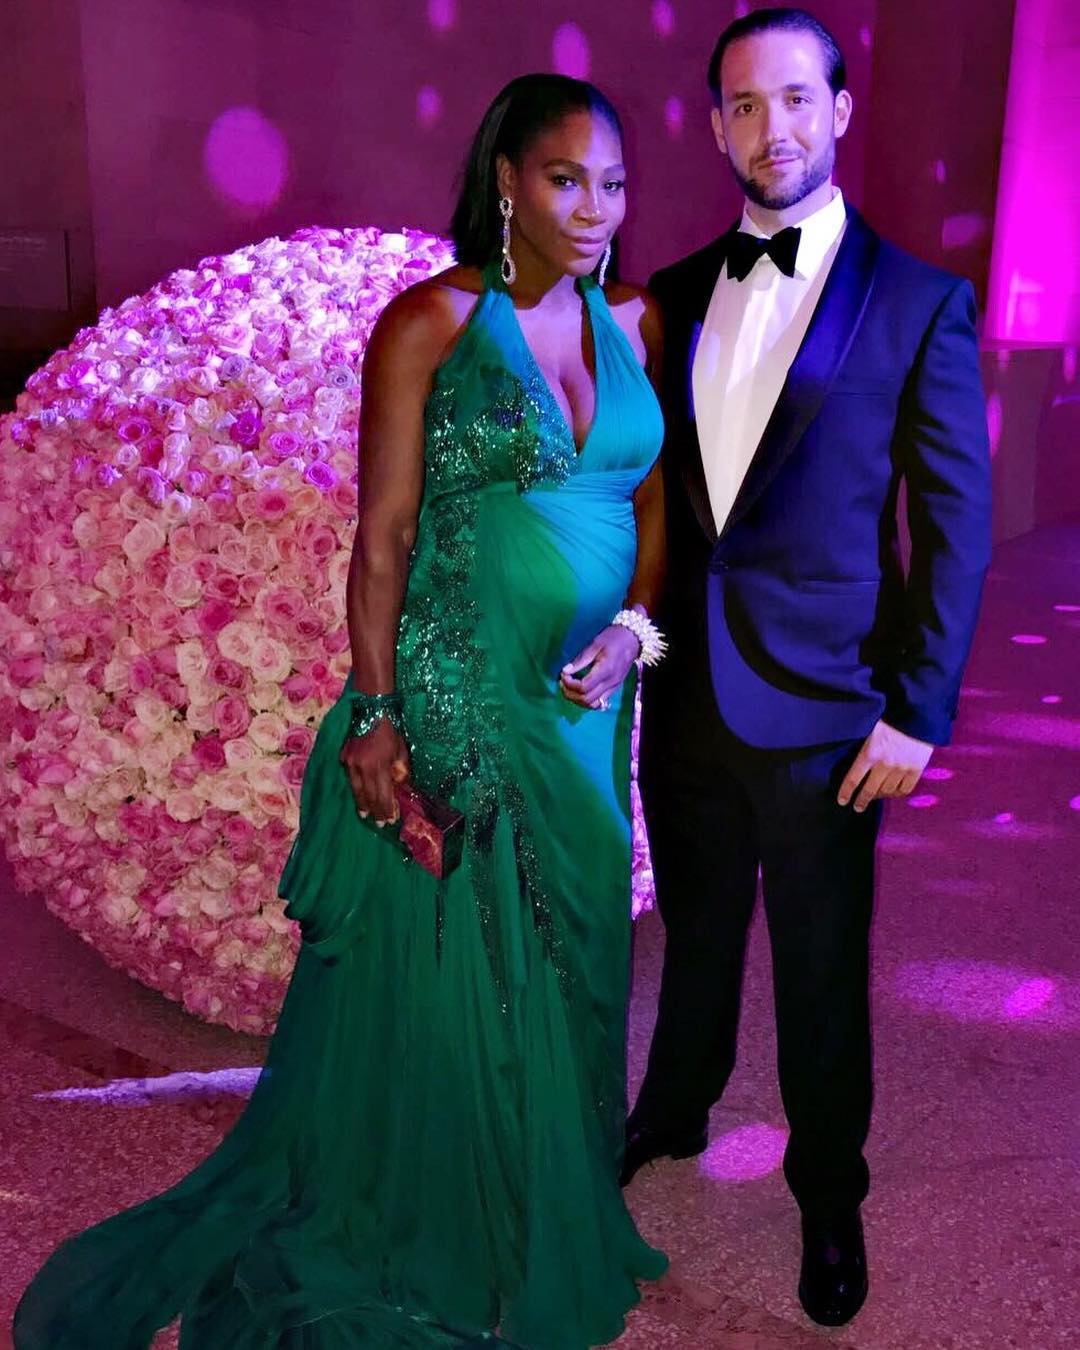 Serena Williams' Fiance Alexis Ohanian Gushes About Her At The 2017 Met Gala 2